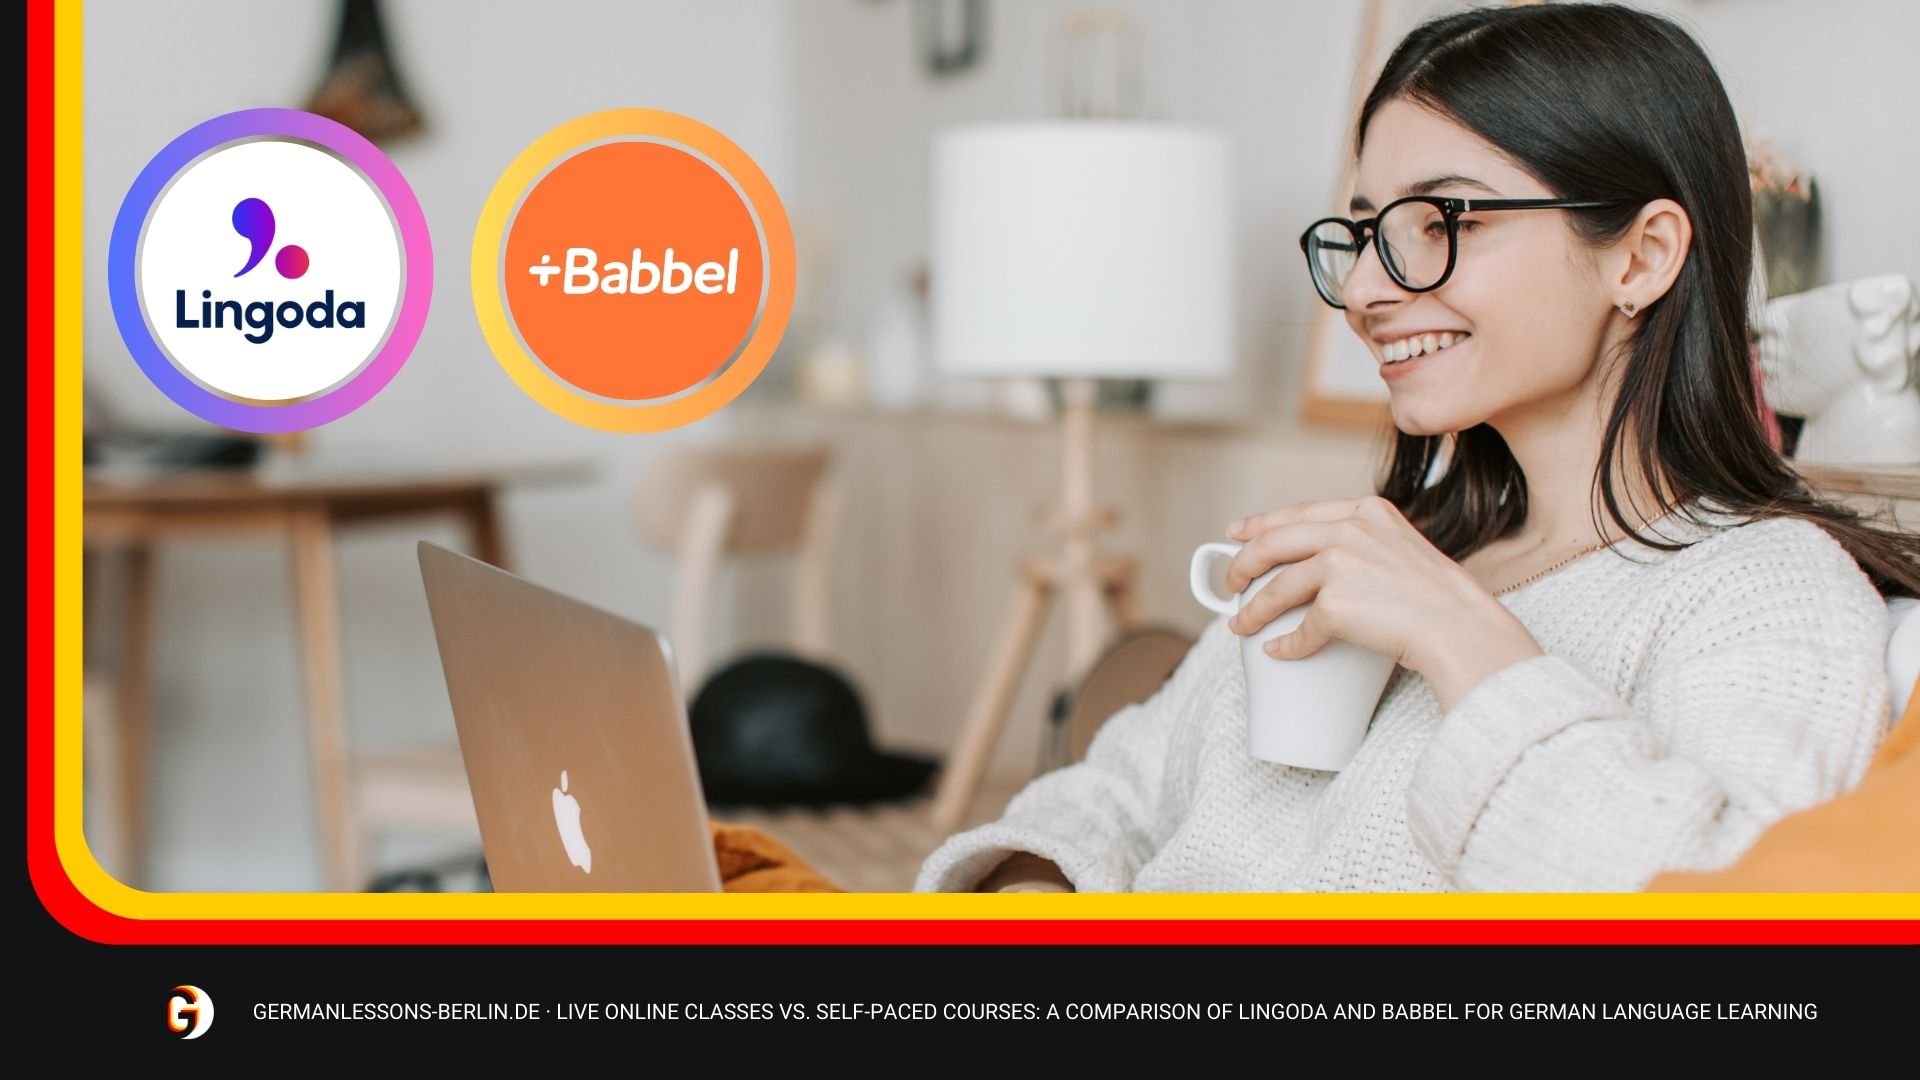 Live Online Classes Vs. Self-Paced Courses: A Comparison Of Lingoda And Babbel For German Language Learning